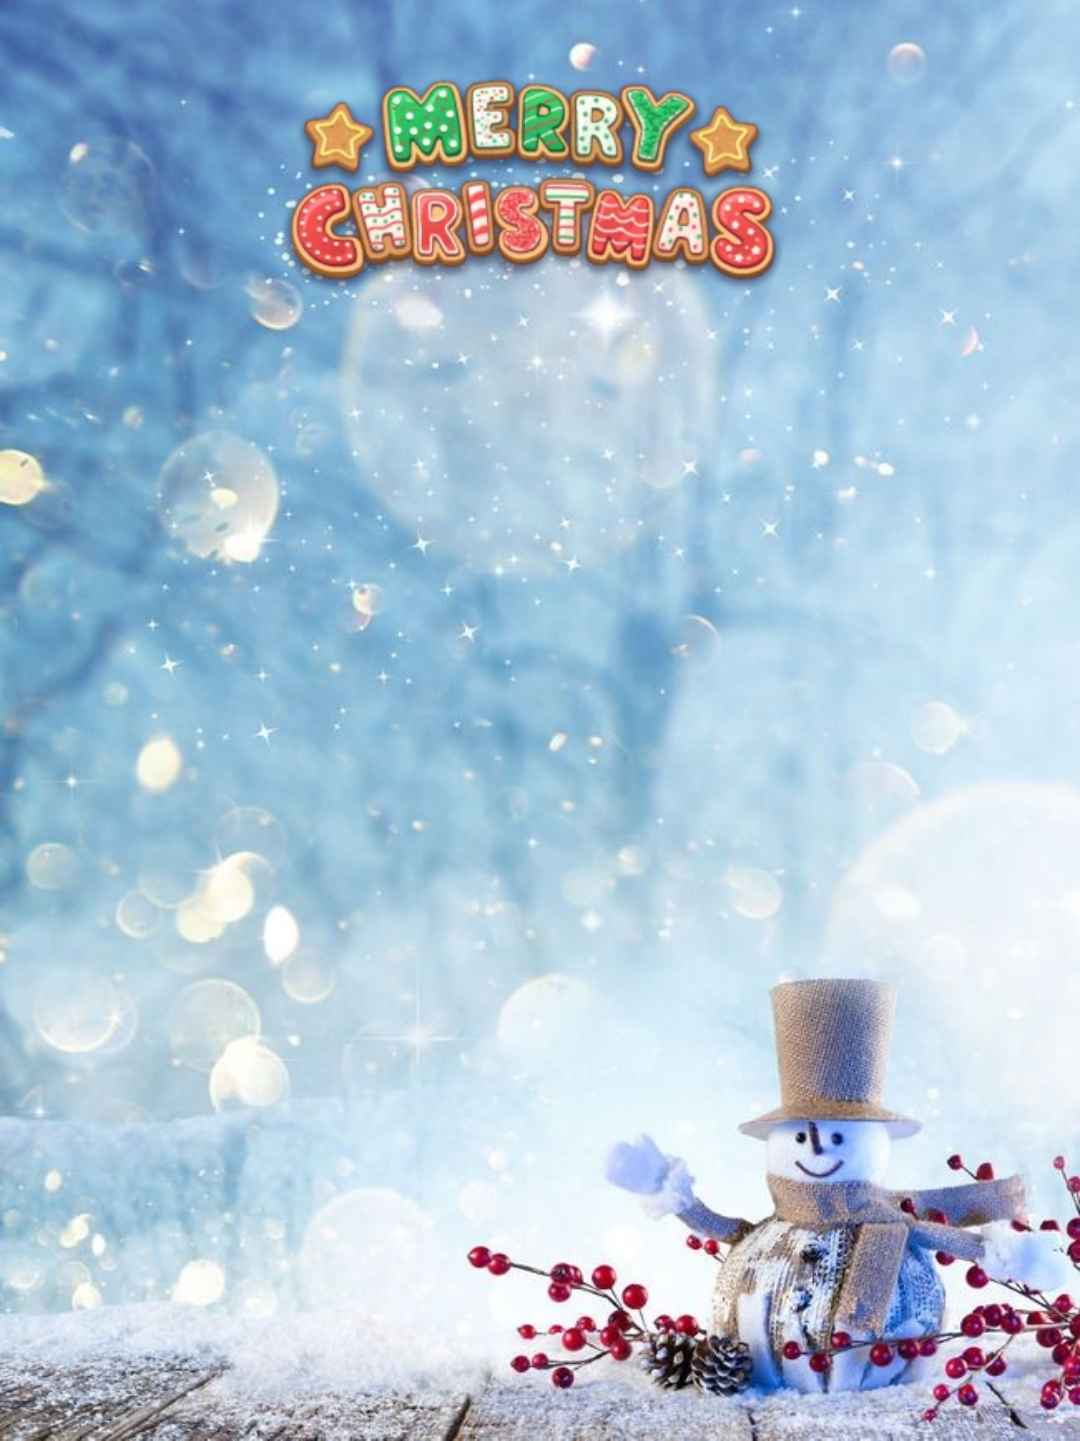 Merry Christmas Backgrounds HD For Cb Photo Editing